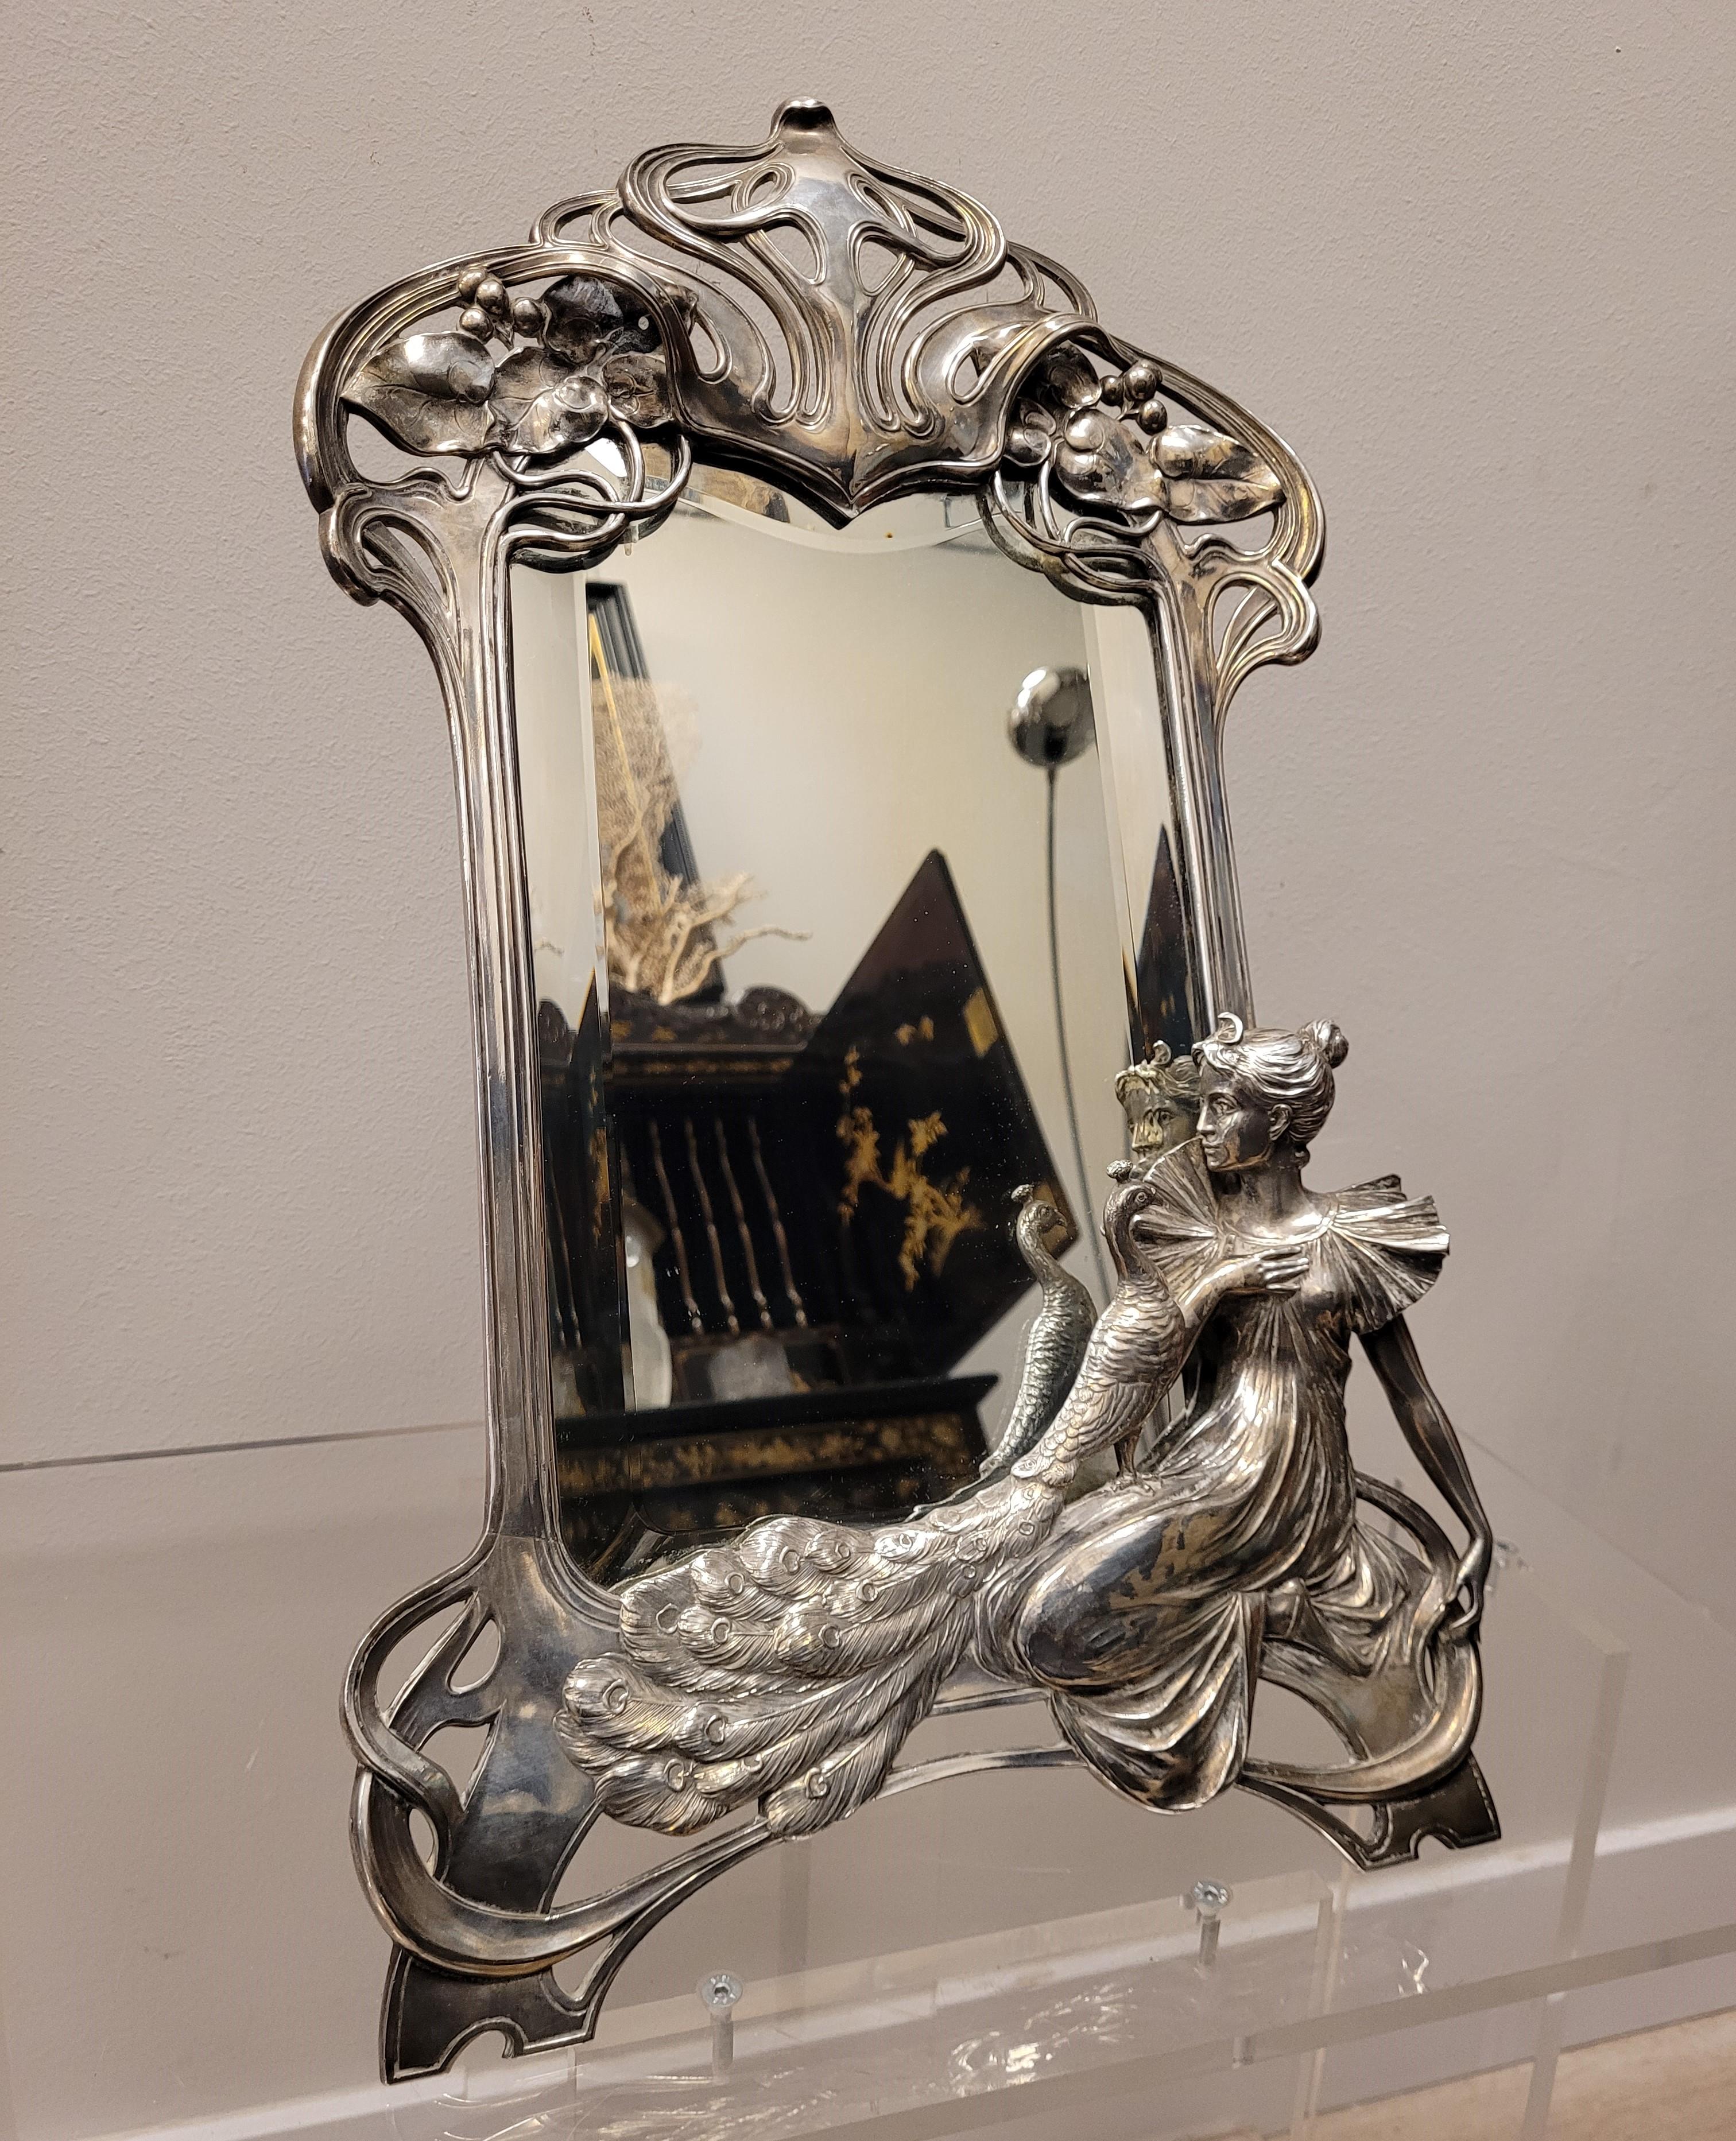 One of a kind Art Nouveau Dressing Mirror, House WMF, Silver plated, circa 1905 - Germany
 
Wonderful Art Nouveau vanity mirror or table mirror from the german firm WMF (Wurttembergische Metallwarenfabrik), dating from around 1905, made in